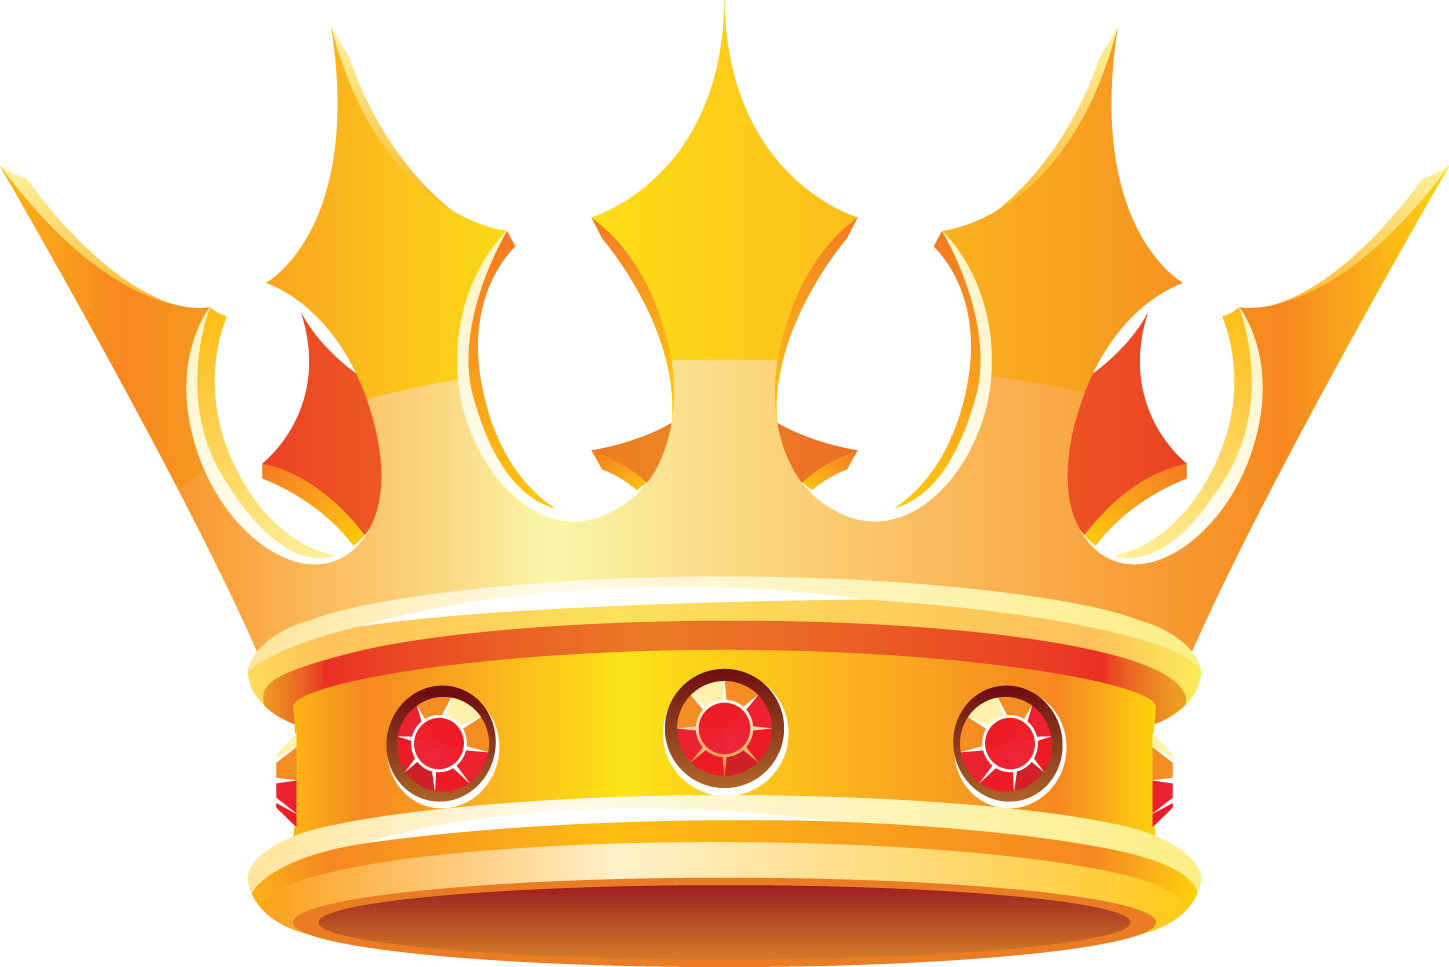 King and queen crown clip art